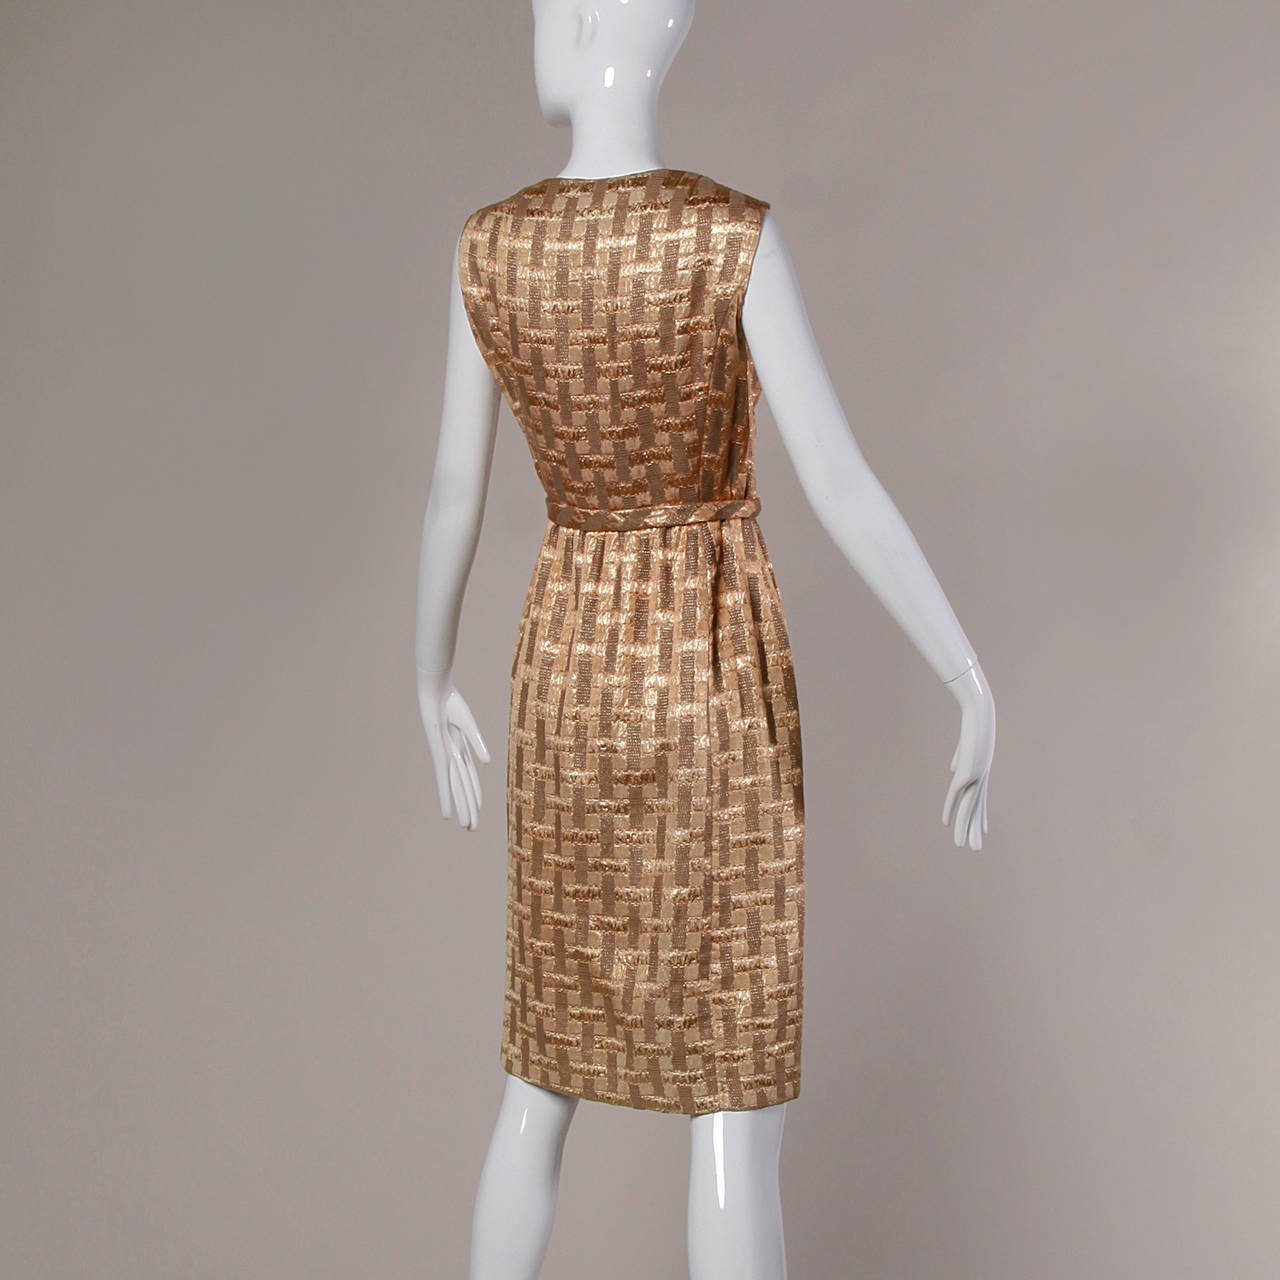 Metallic Dresses For Sale And Fashion Outlet Review